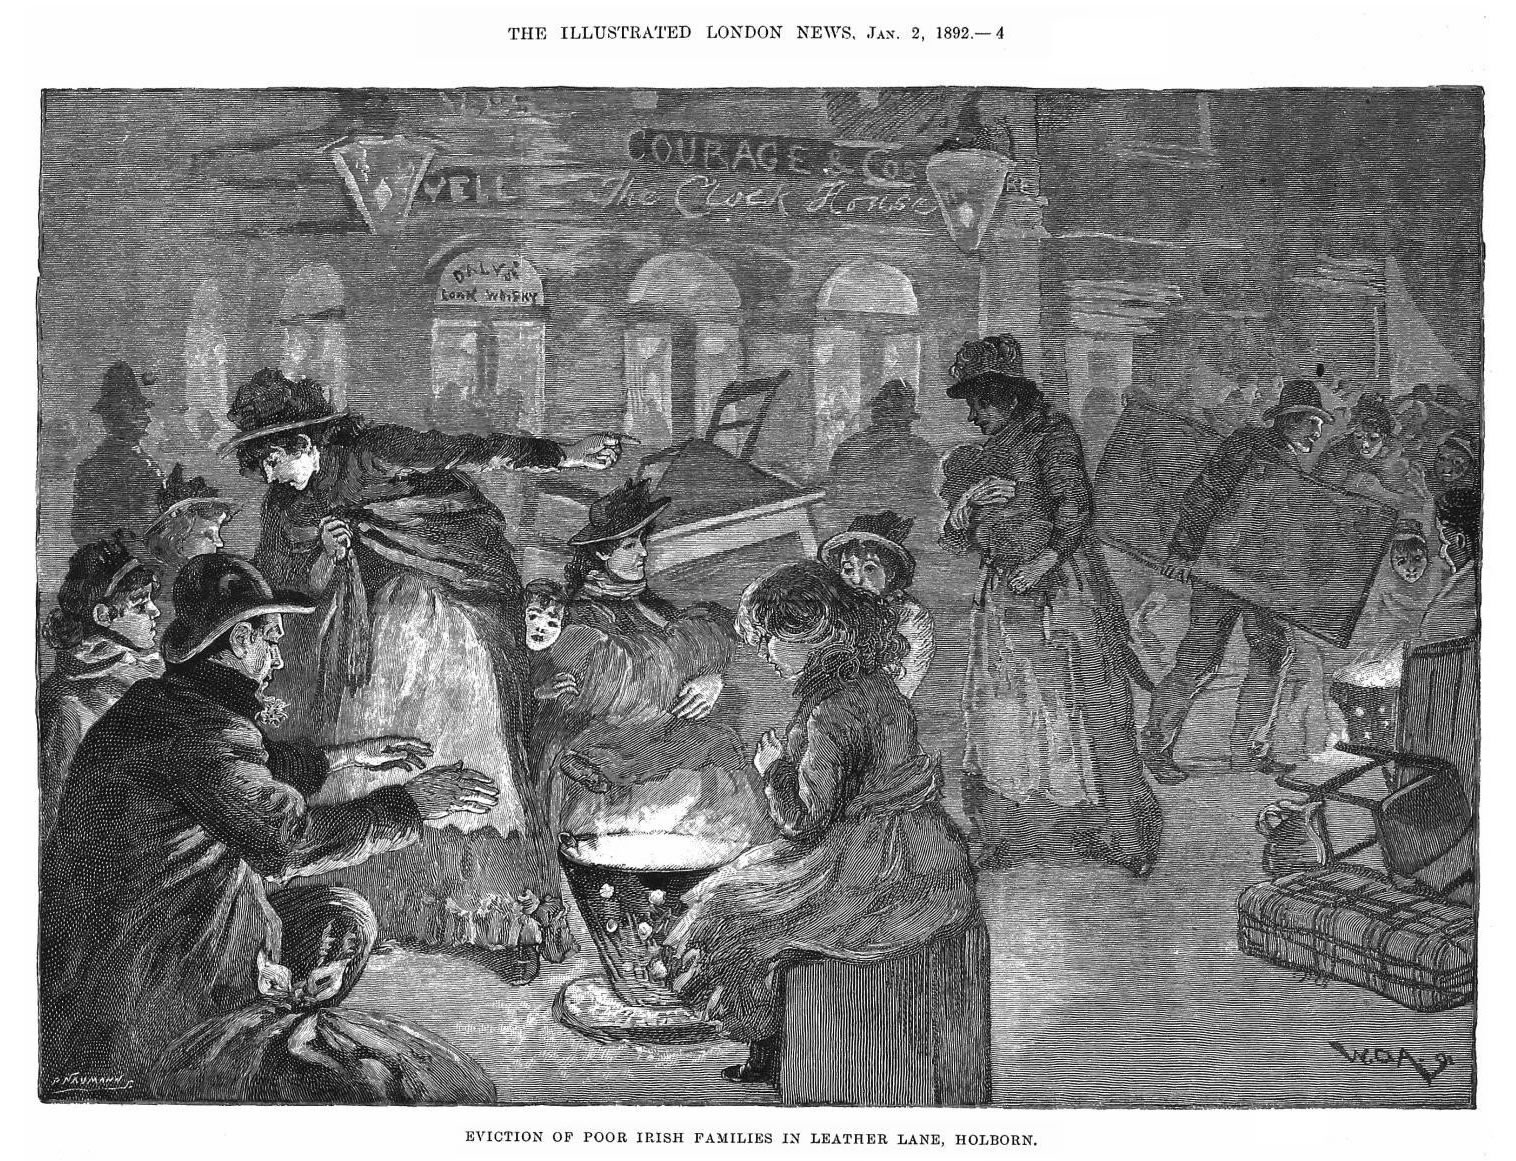 Eviction of the Irish families in The Illustrated London News on TheGenealogist 2 January 1892